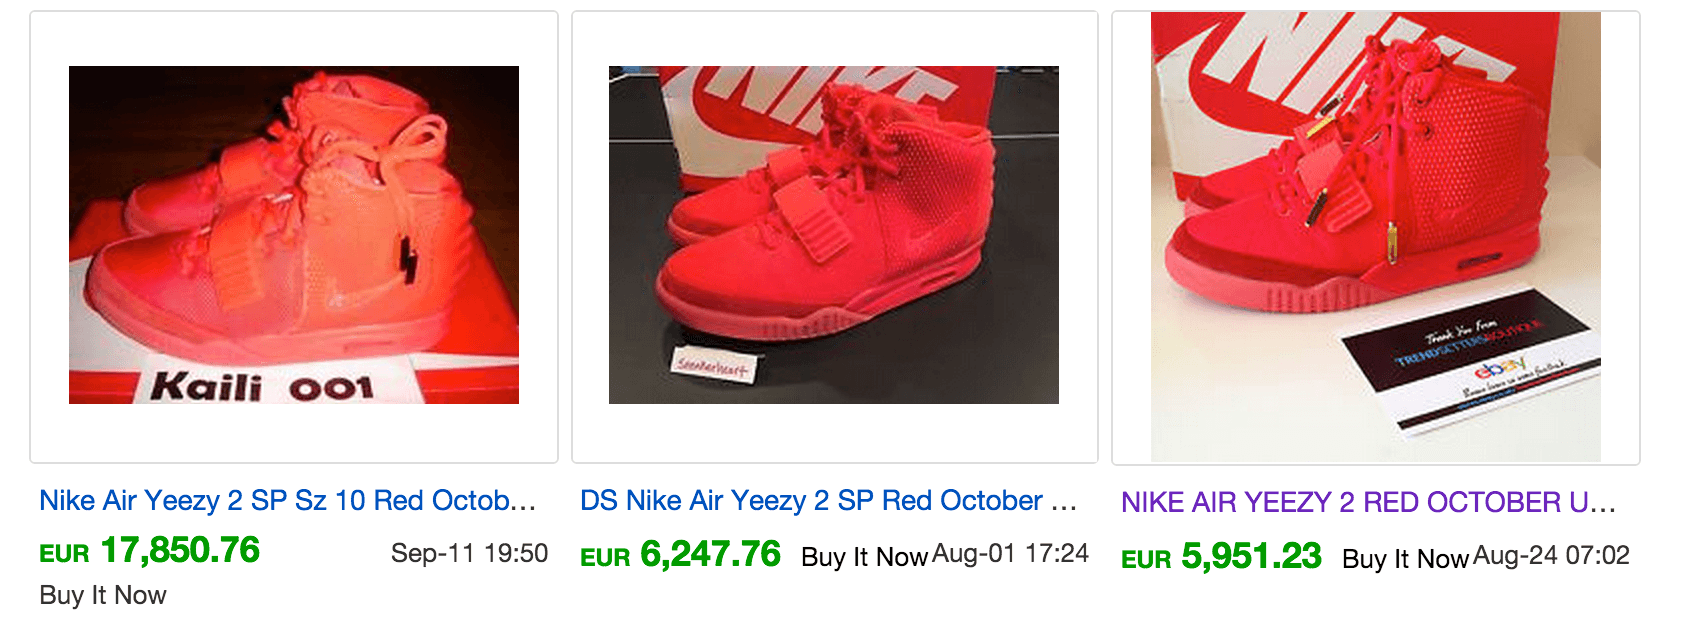 Air Yeezy 2 "Red October" was one of the most prestigious releases during our operation.